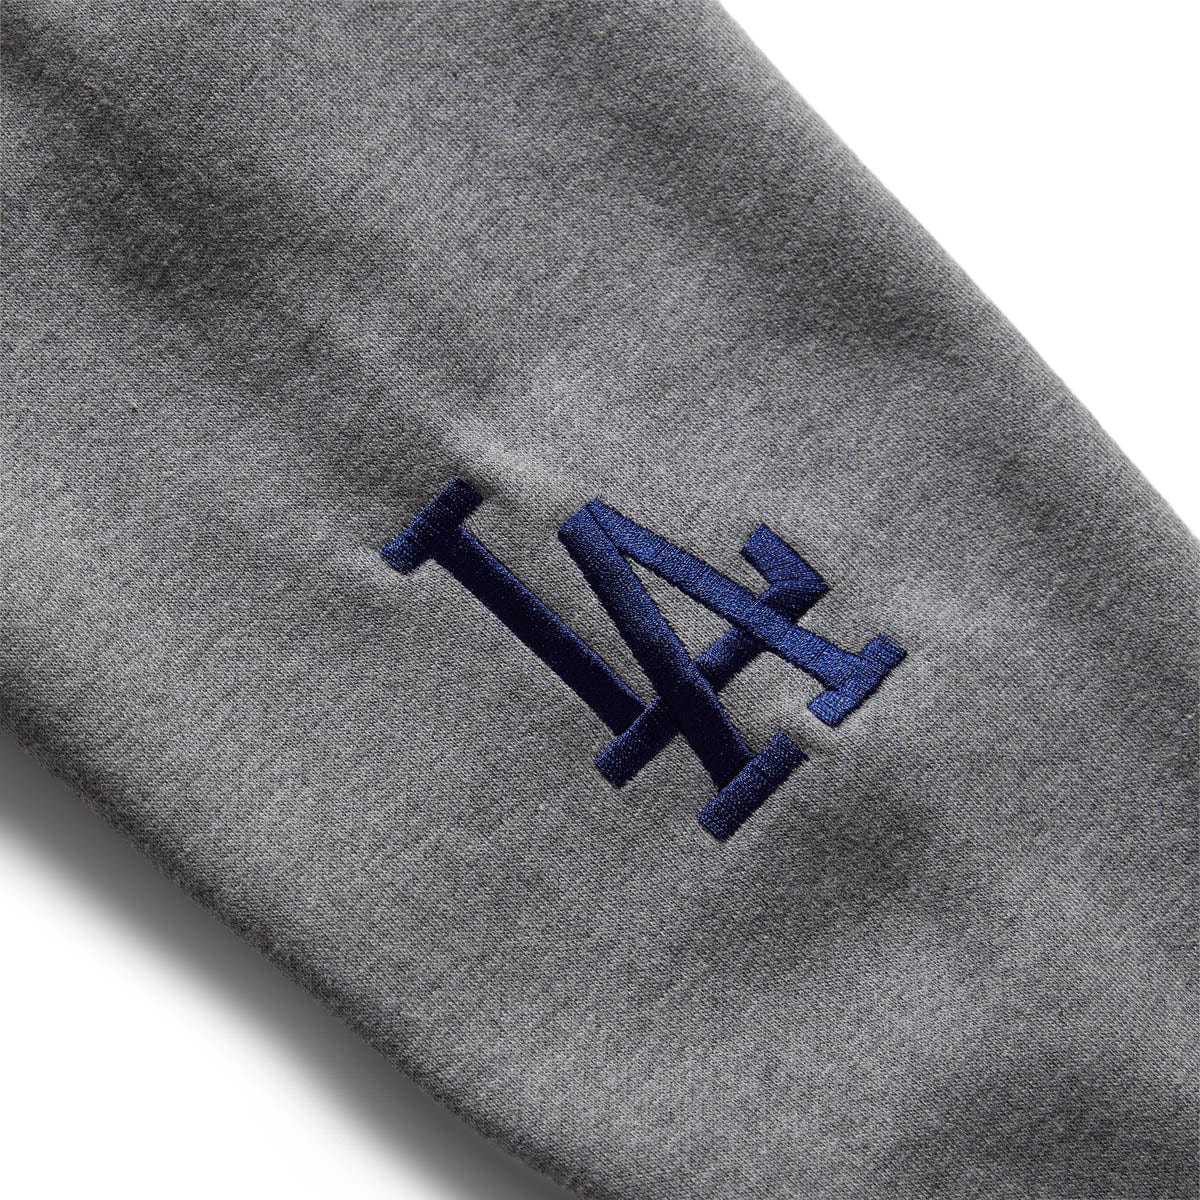 New Era Los Angeles Dodgers City Connect Pullover Hooded Sweatshirt Black